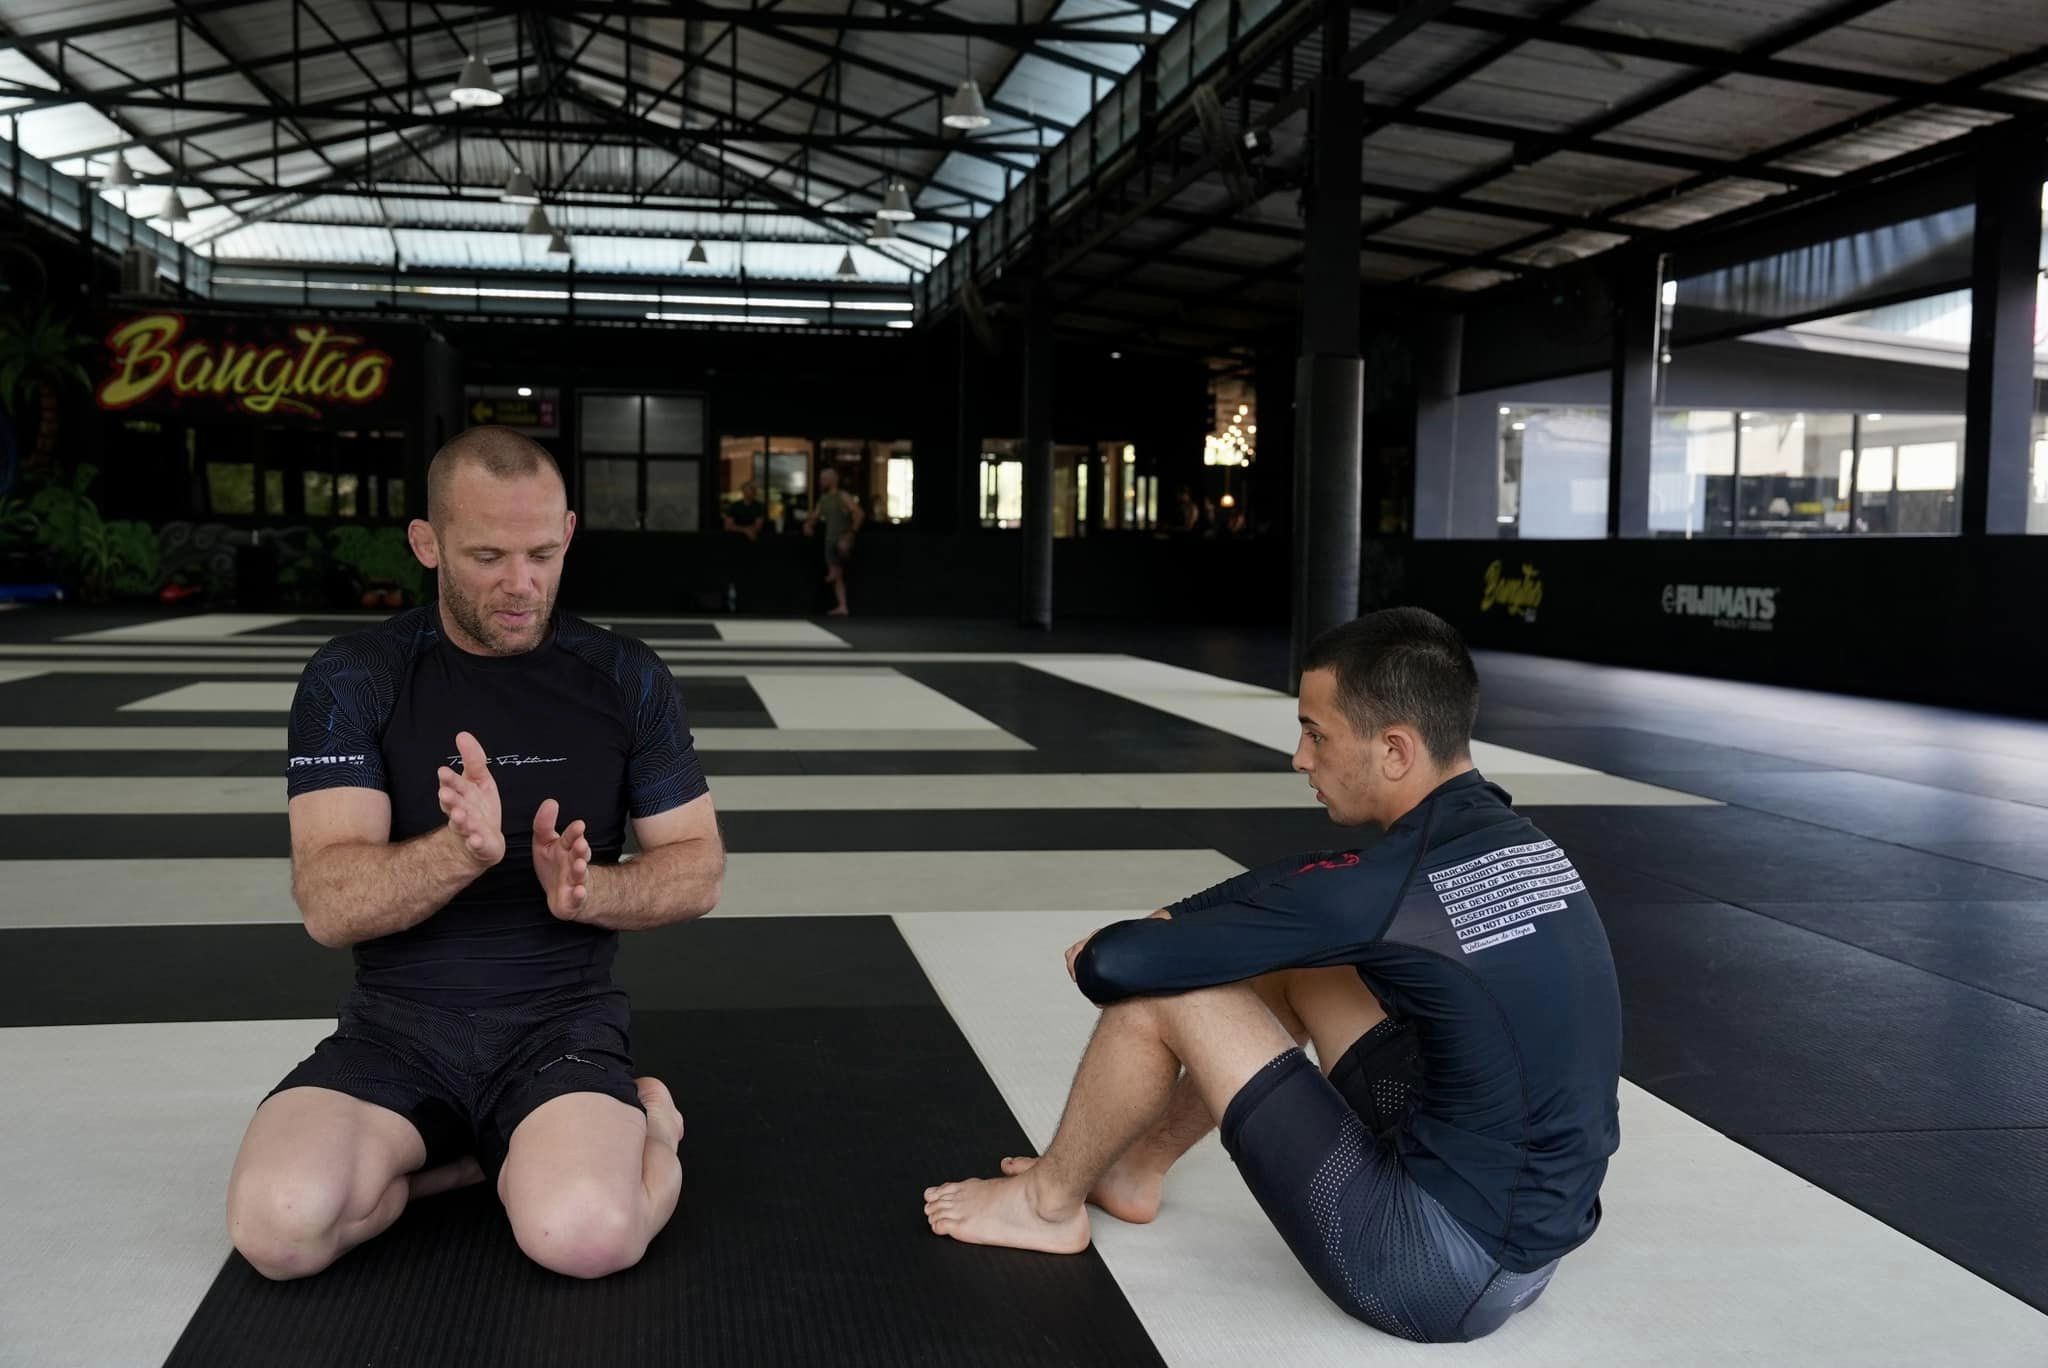 Bangtao Muay Thai and MMA gym in Thailand